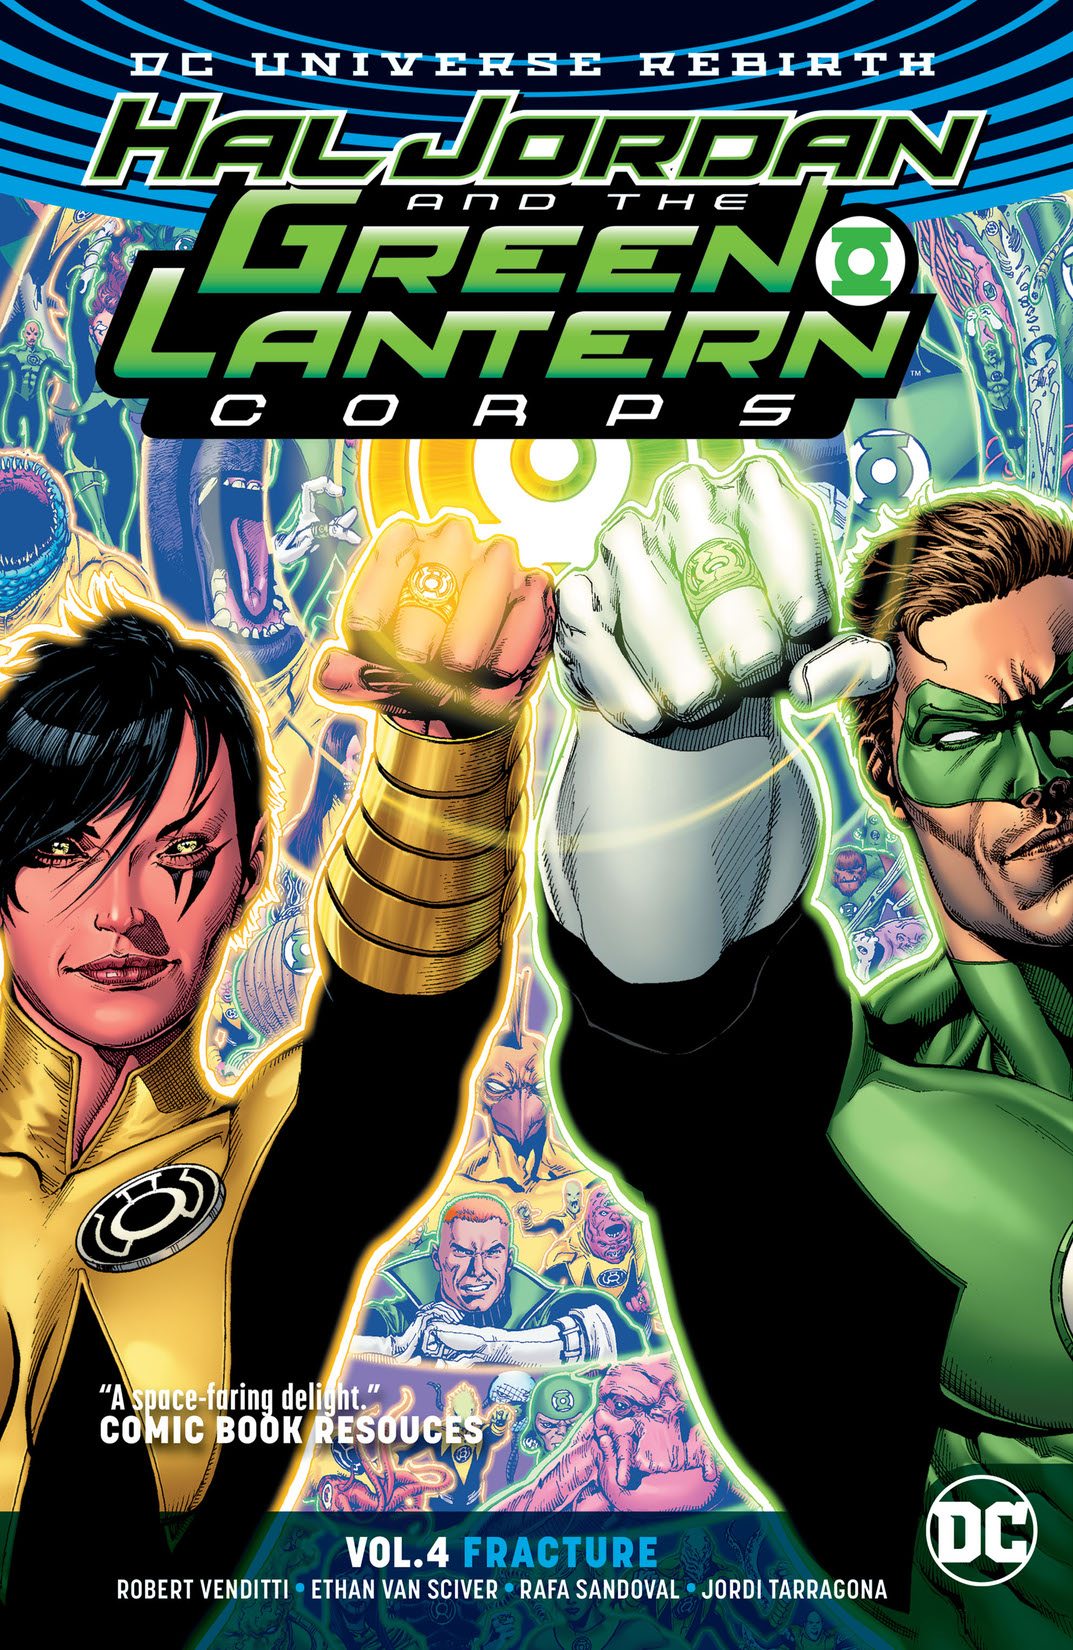 Hal Jordan and the Green Lantern Corps Vol. 4: Fracture preview images